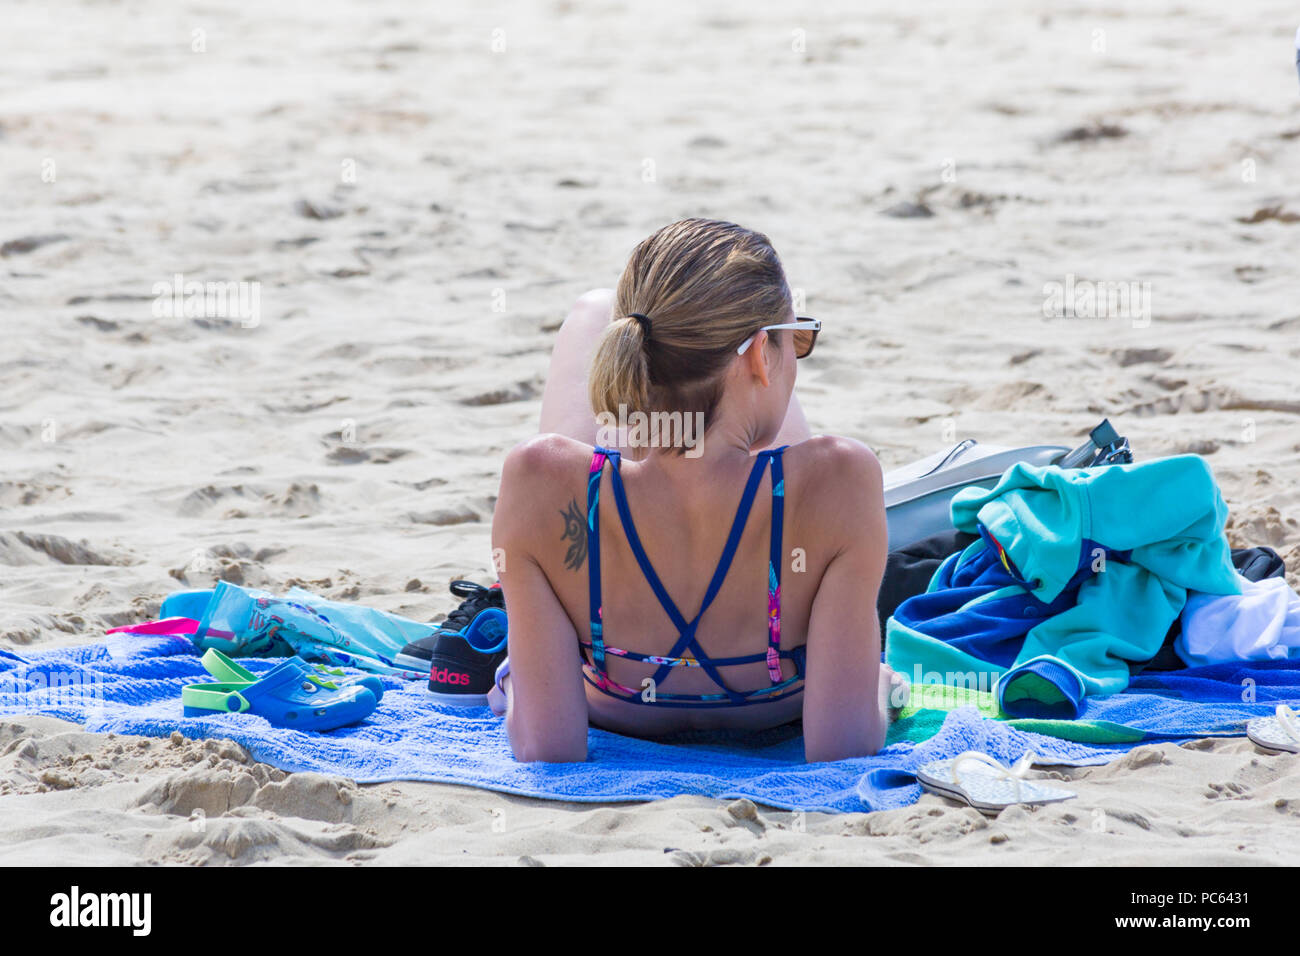 Bournemouth, Dorset, UK. 31st July 2018. UK weather:  the sun returns and temperatures rise as beach-goers head to the seaside to enjoy the warm sunny weather. woman sunbathing on beach. Credit: Carolyn Jenkins/Alamy Live News Stock Photo